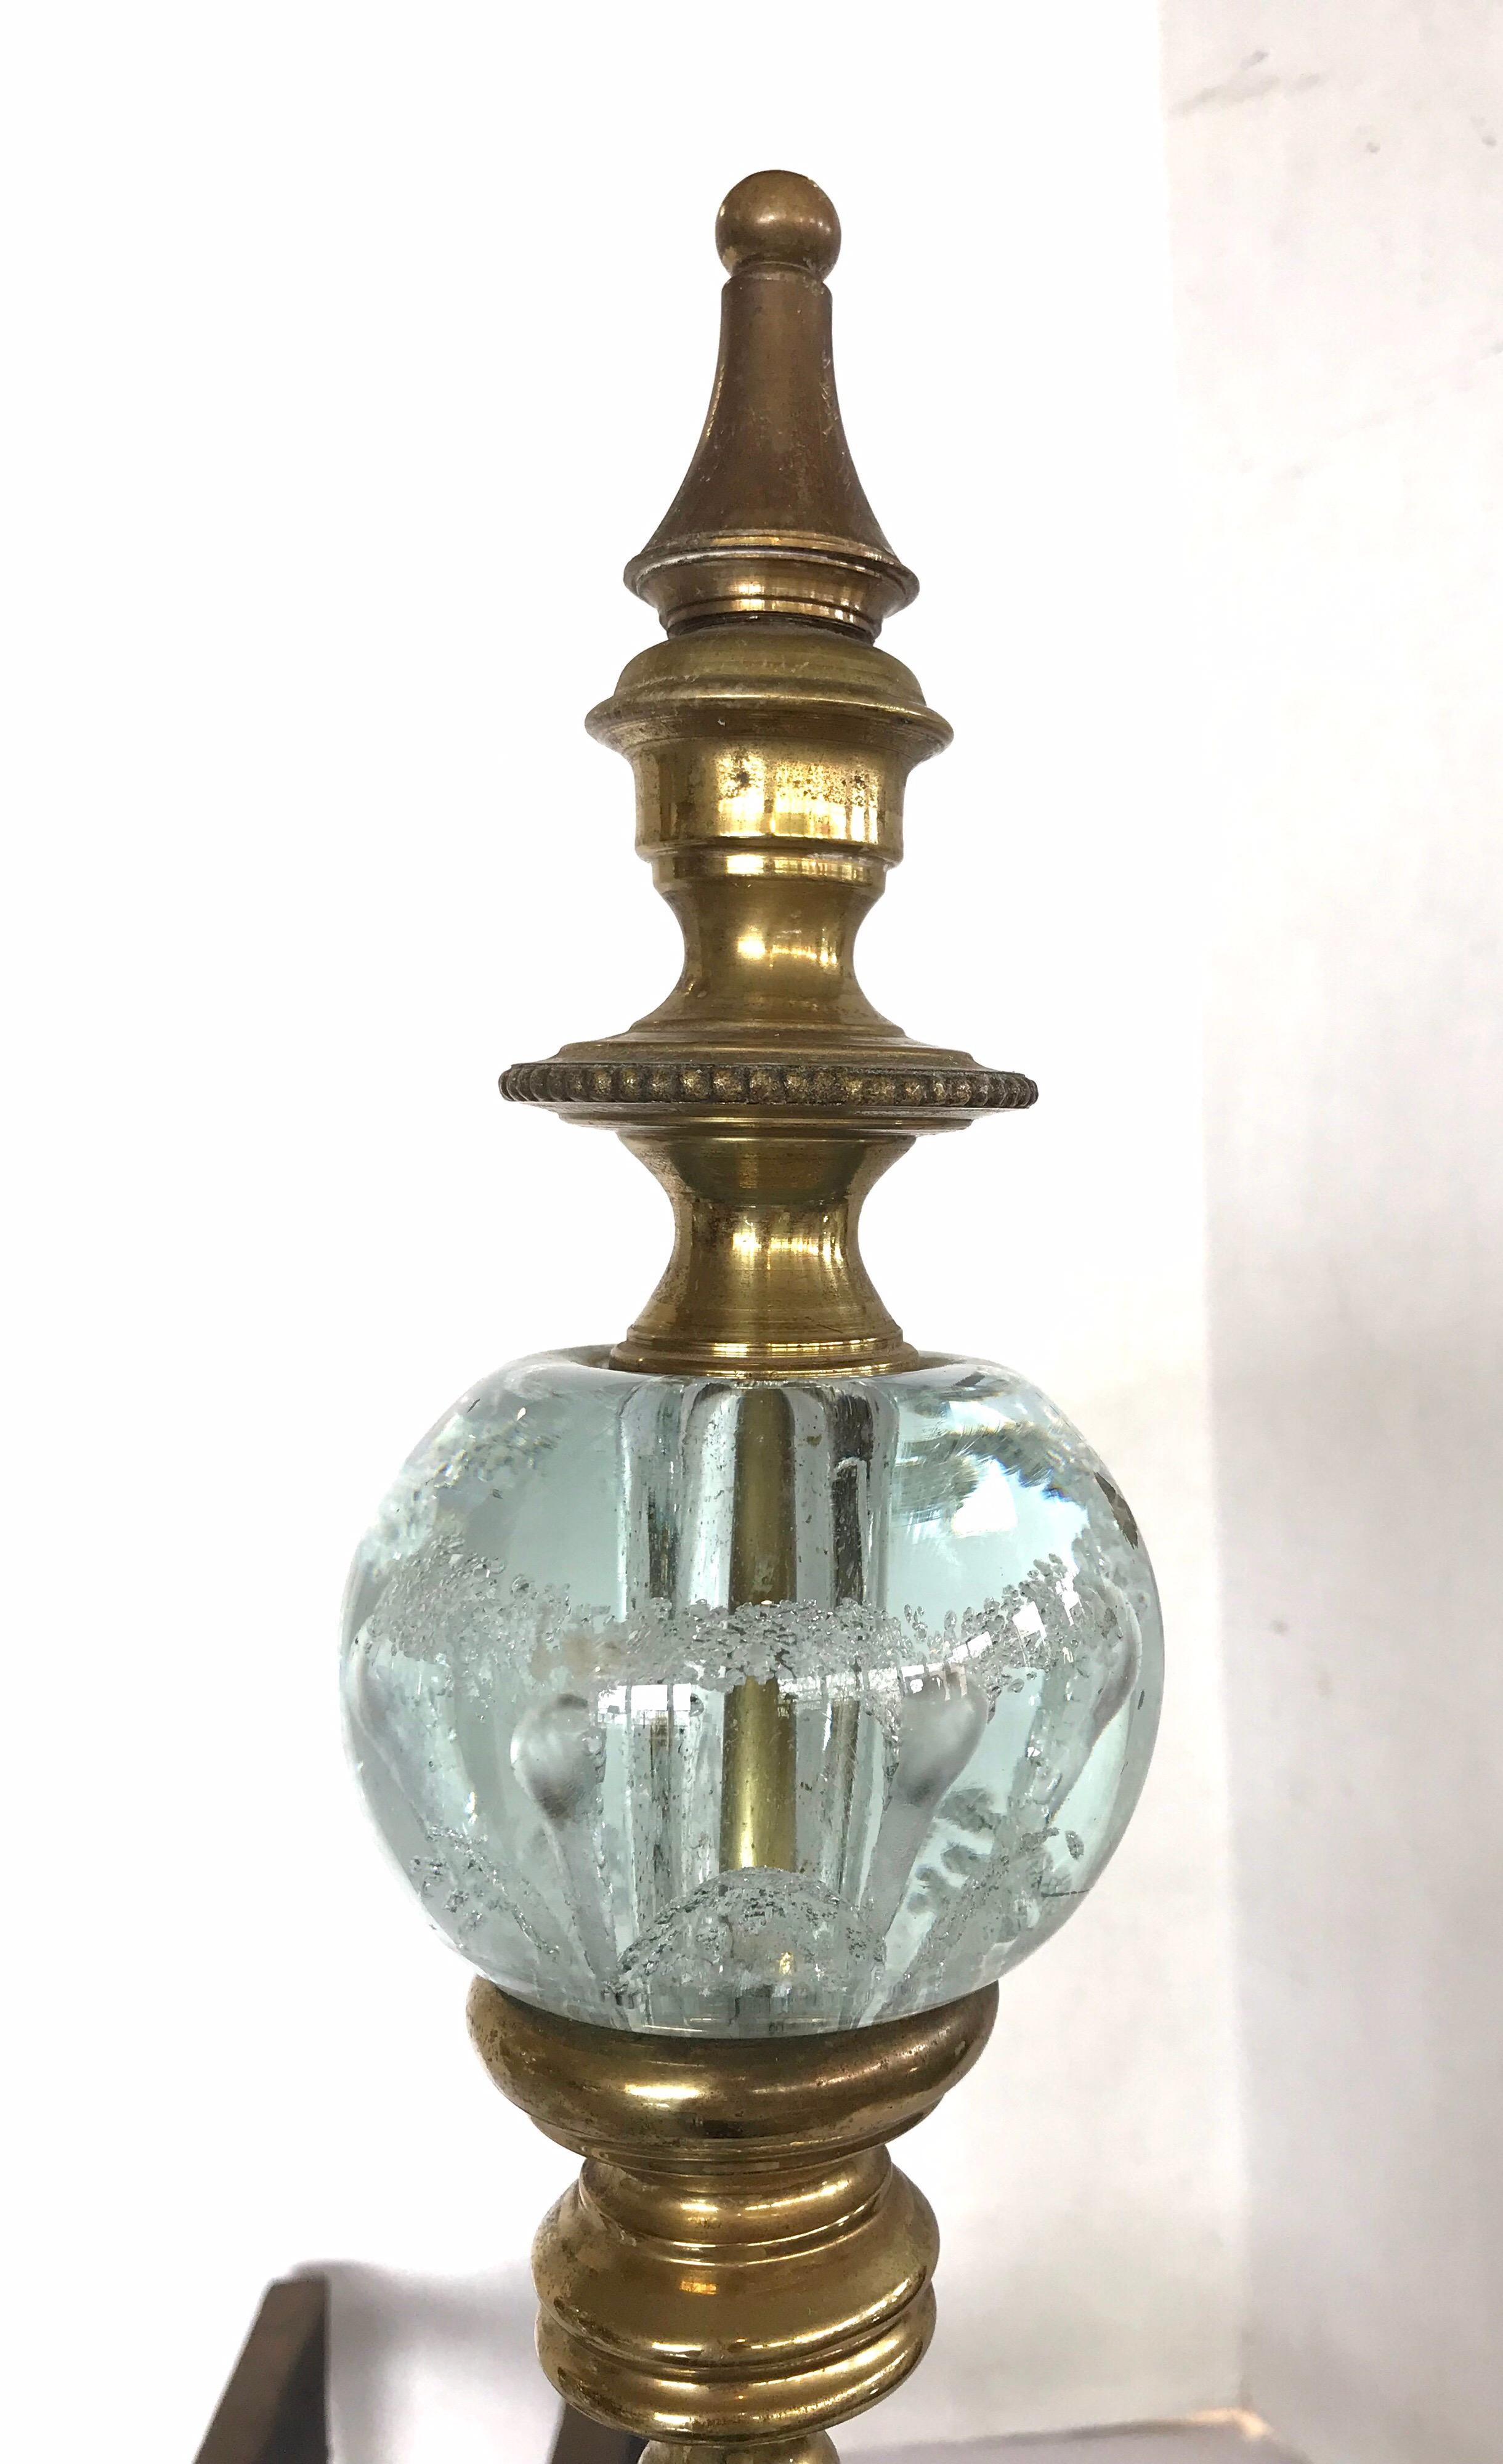 Beautiful St. Clair andirons feature brass finial tops and pedestals with crystal paperweight accents on scrolling brass feet with cast iron log stops. The color of the crystal is a very light blue, almost the color of water.